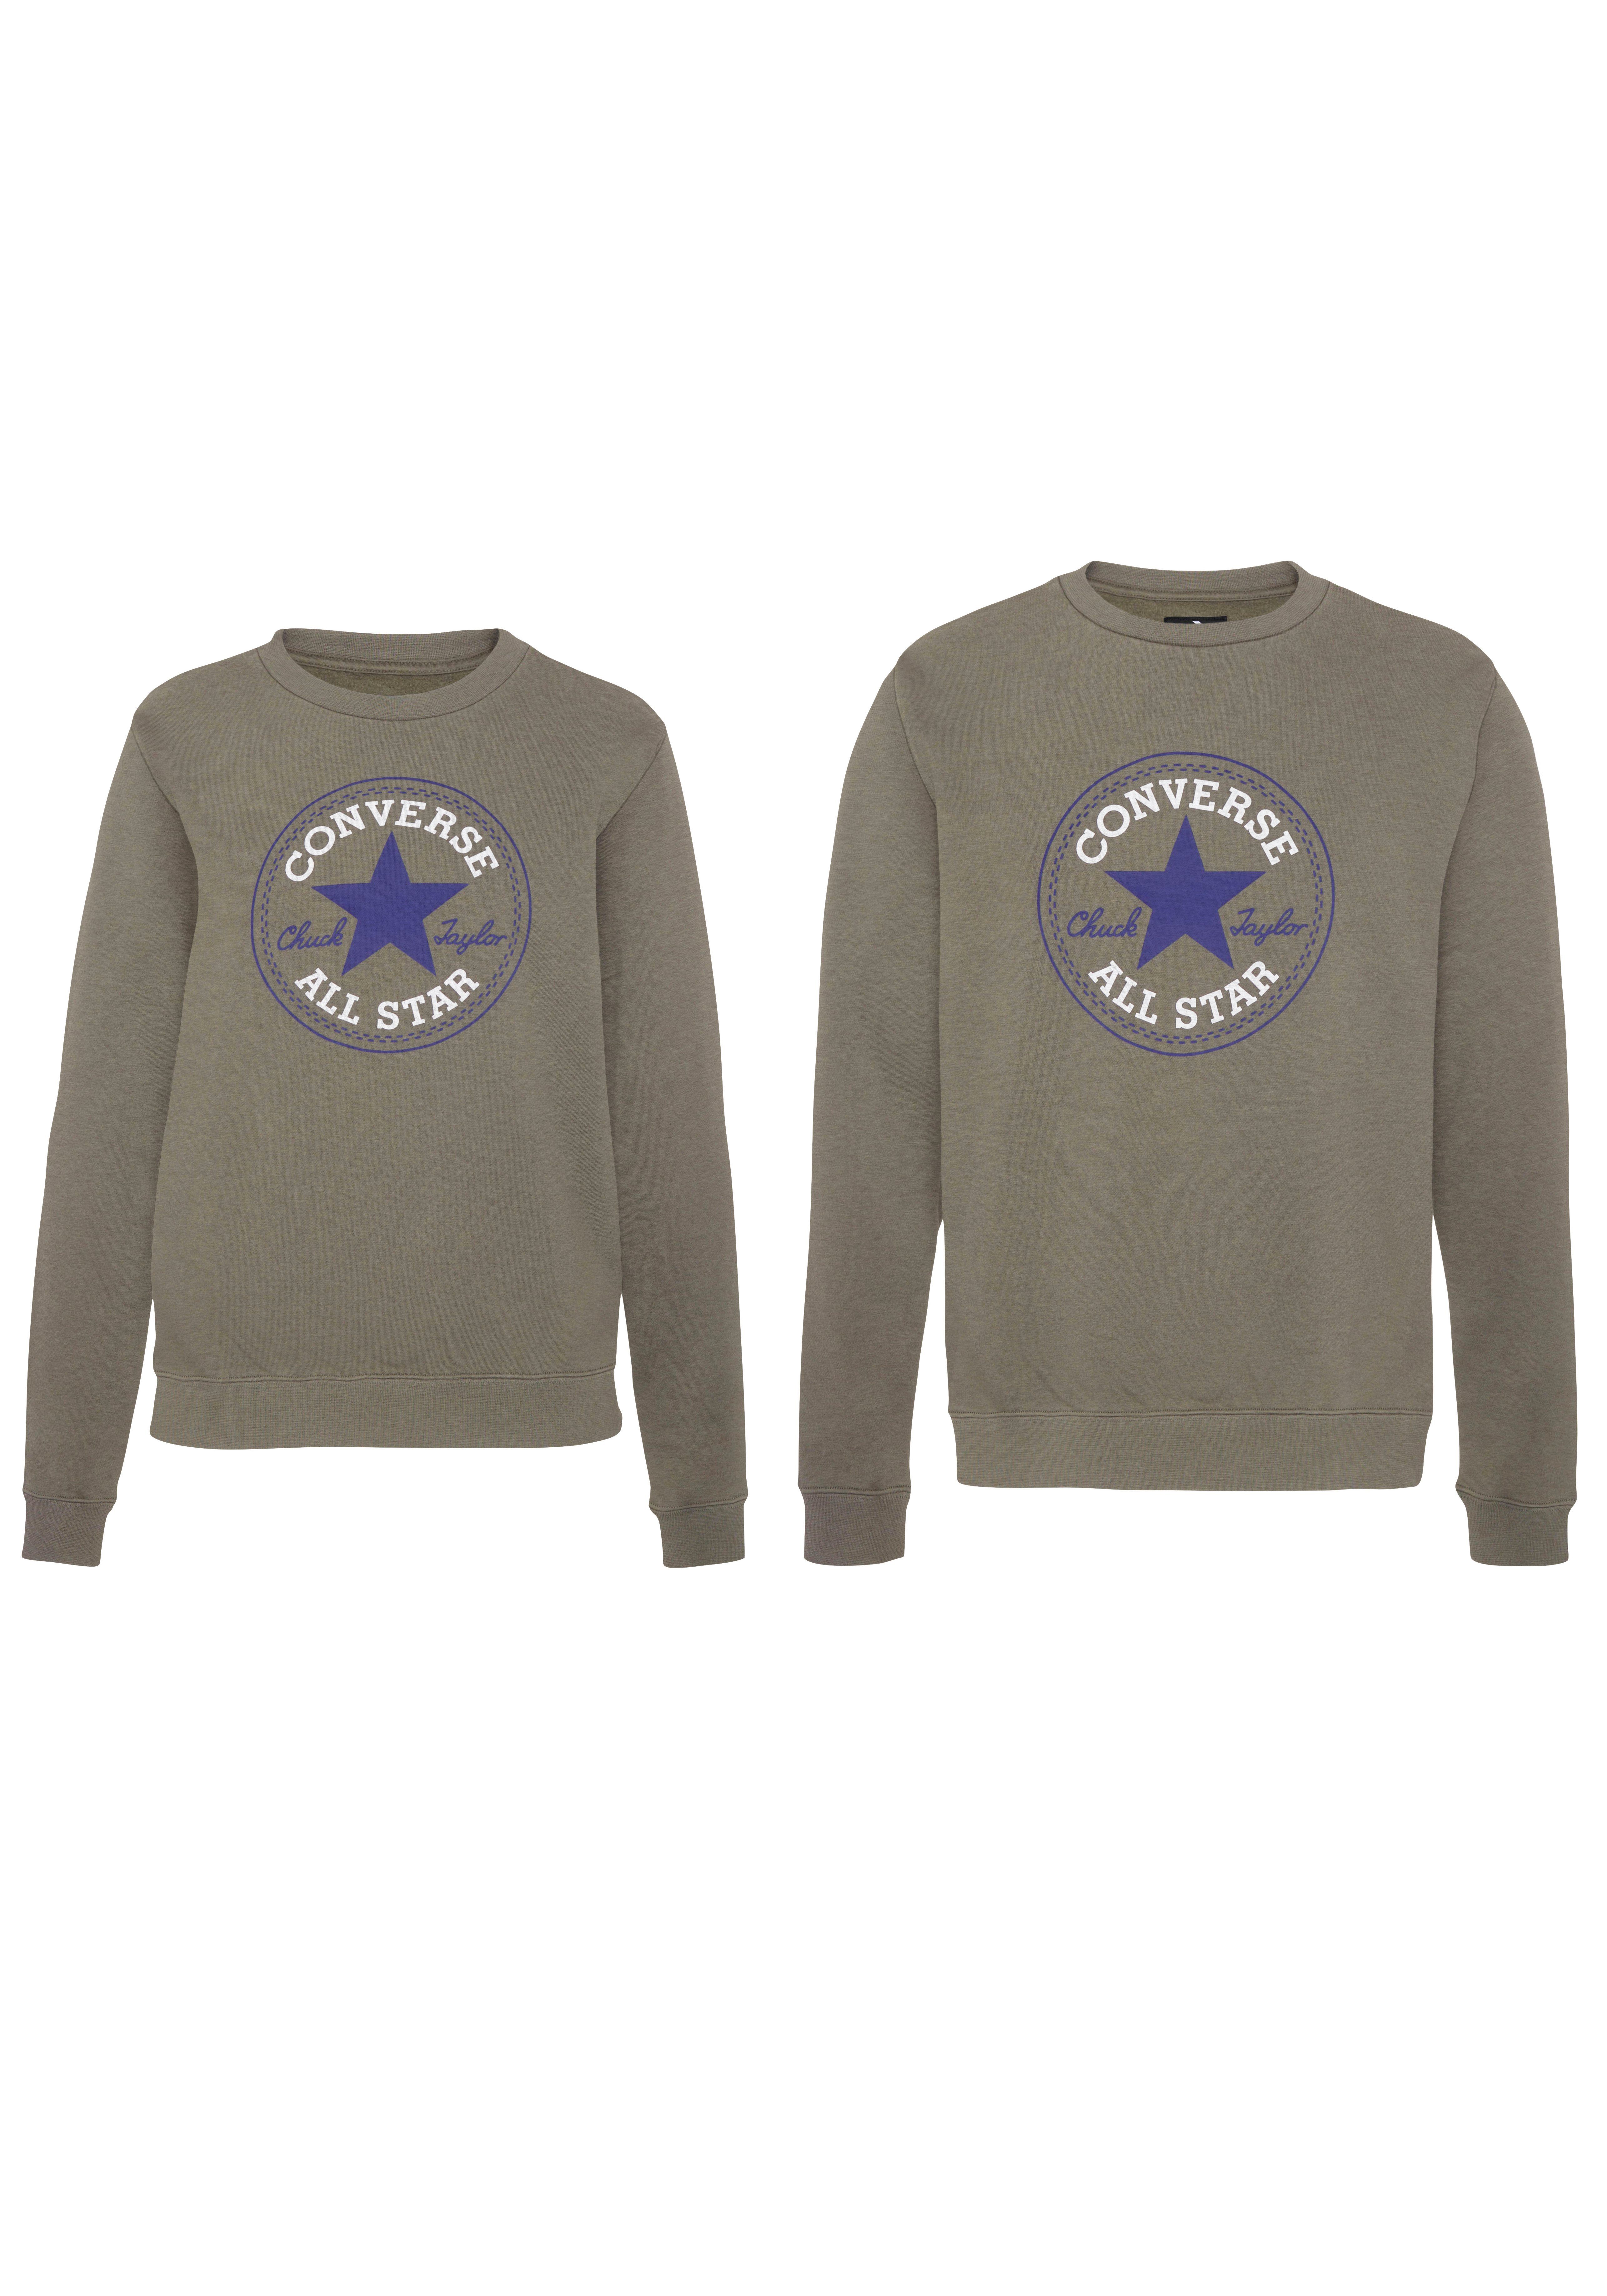 Converse Sweatshirt UNISEX ALL olive BACK PATCH BRUSHED STAR